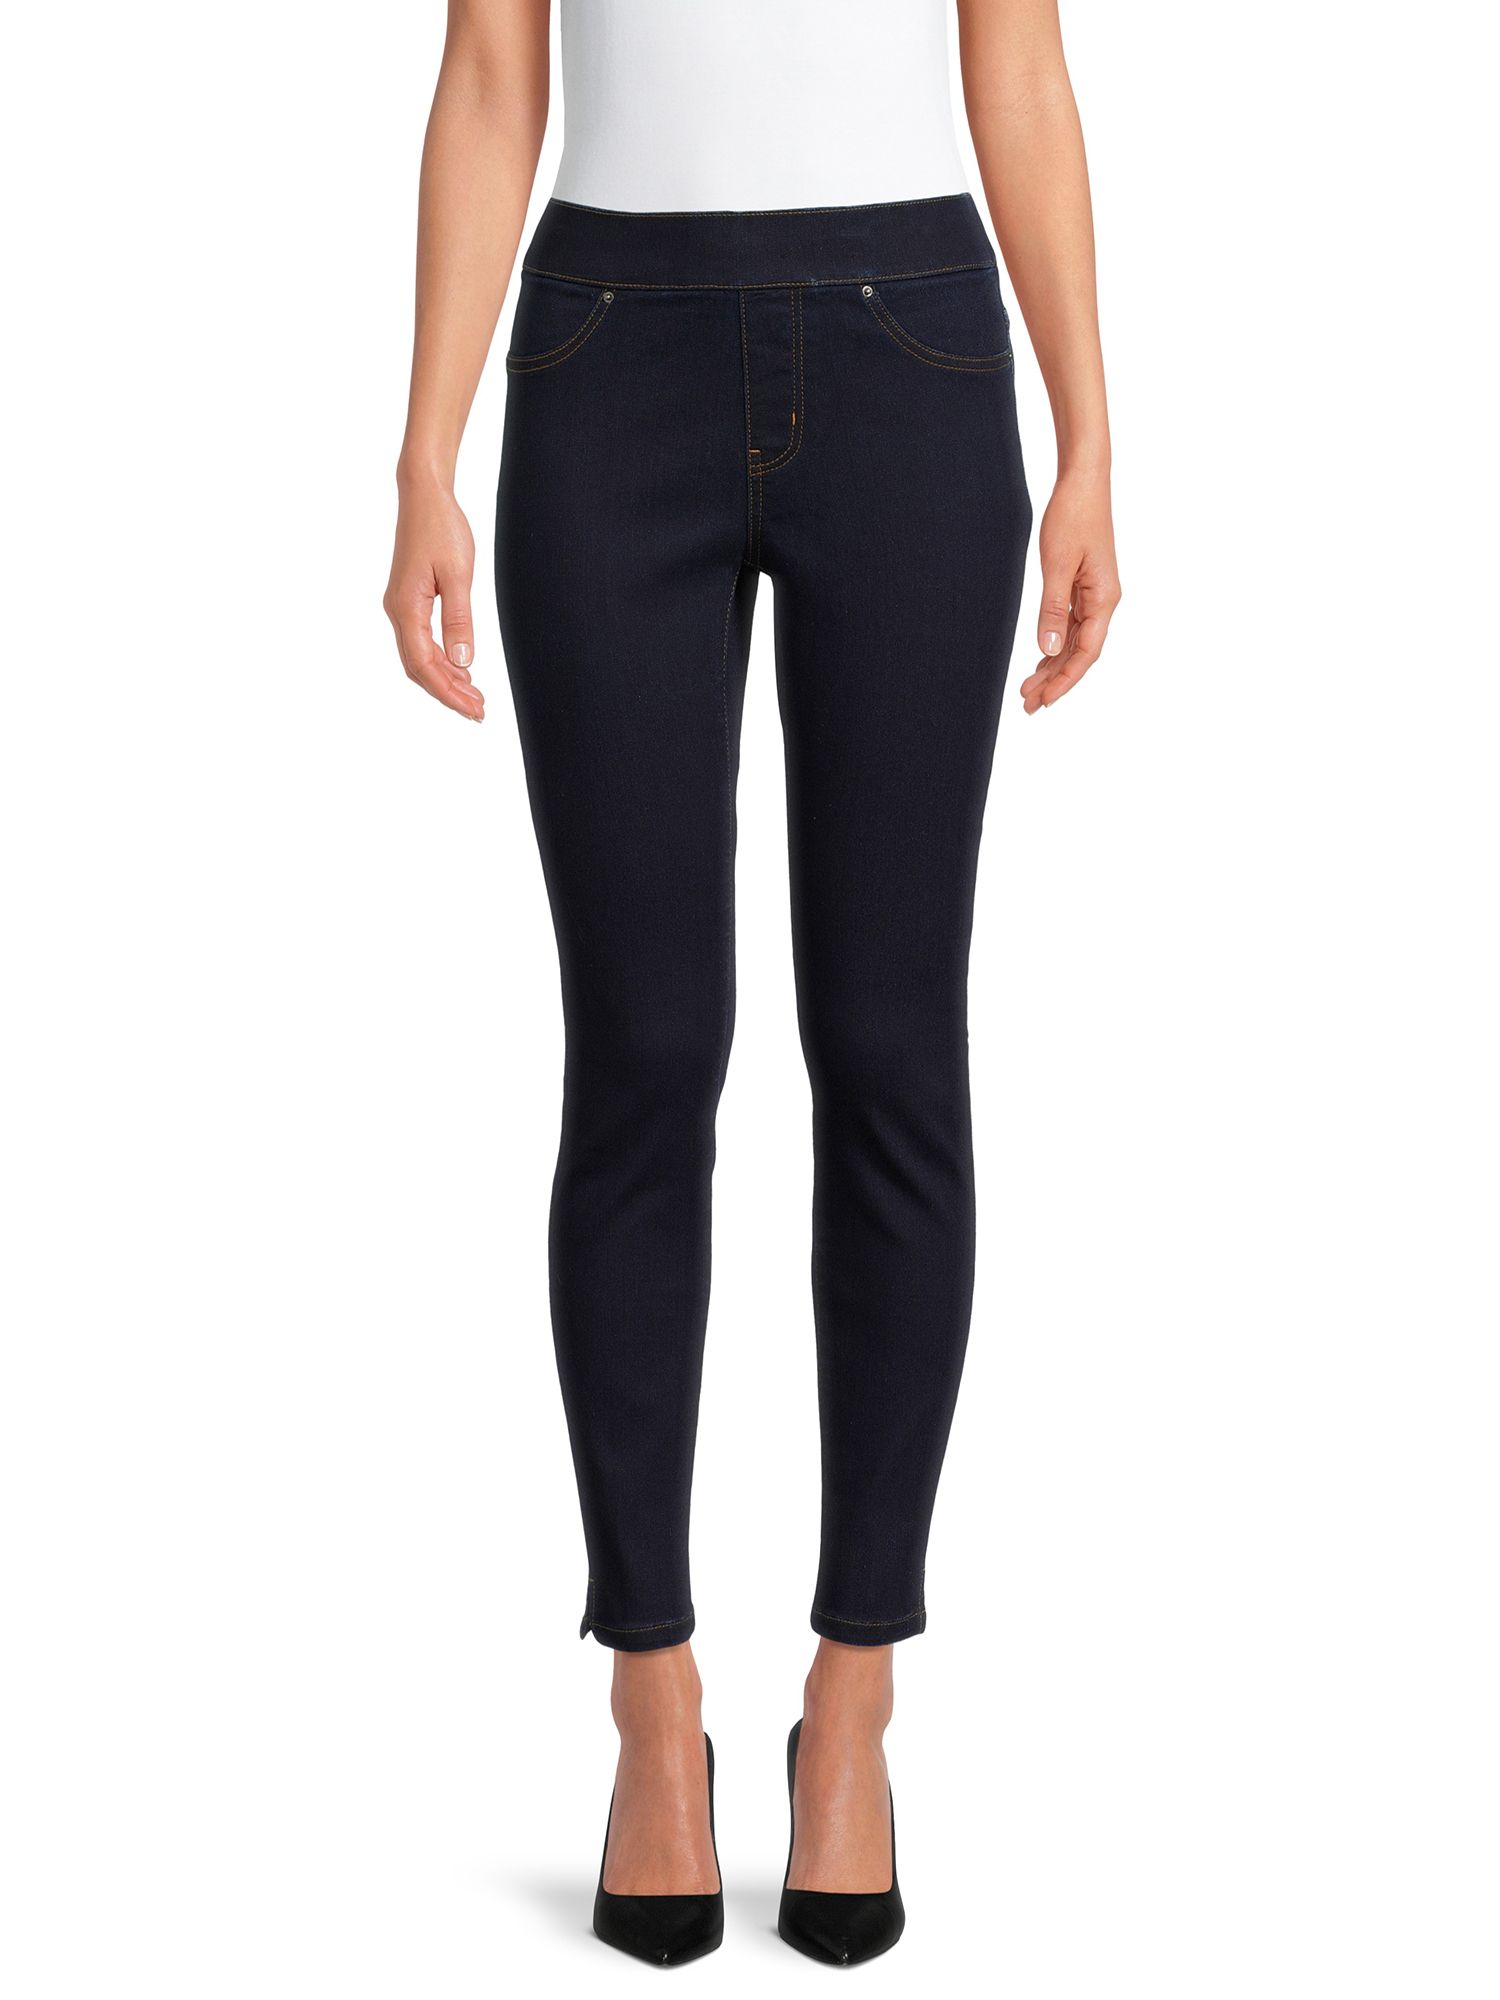 The Pioneer Woman Pull On 29" Inseam Jean